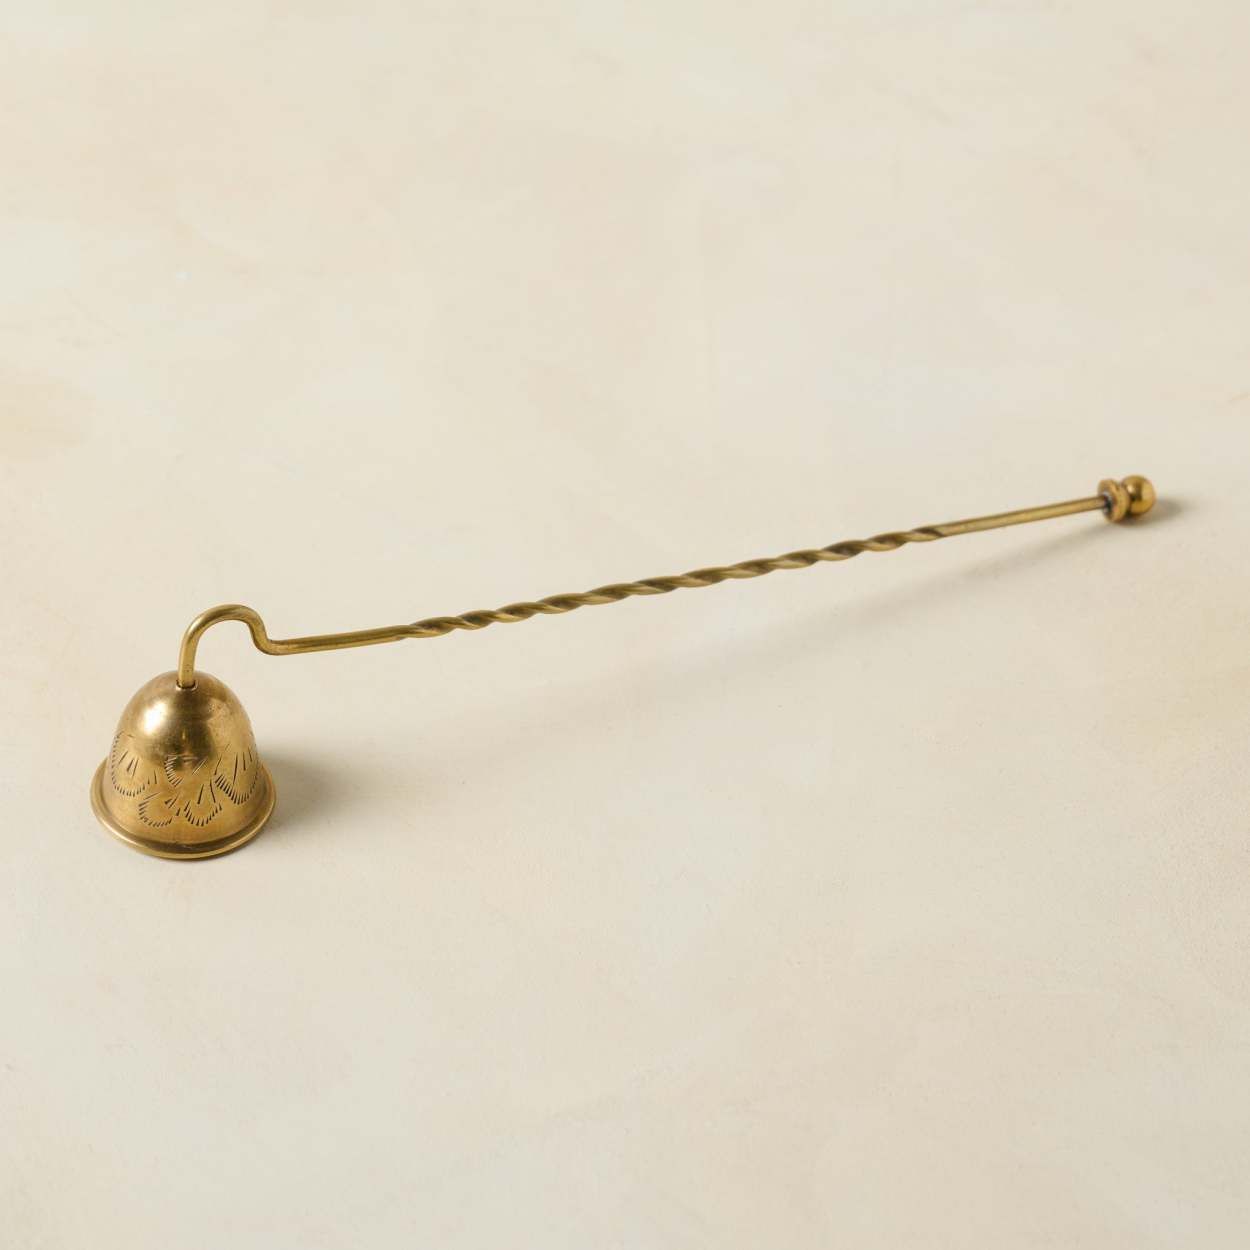 Vintage Inspired Candle Snuffer | Magnolia